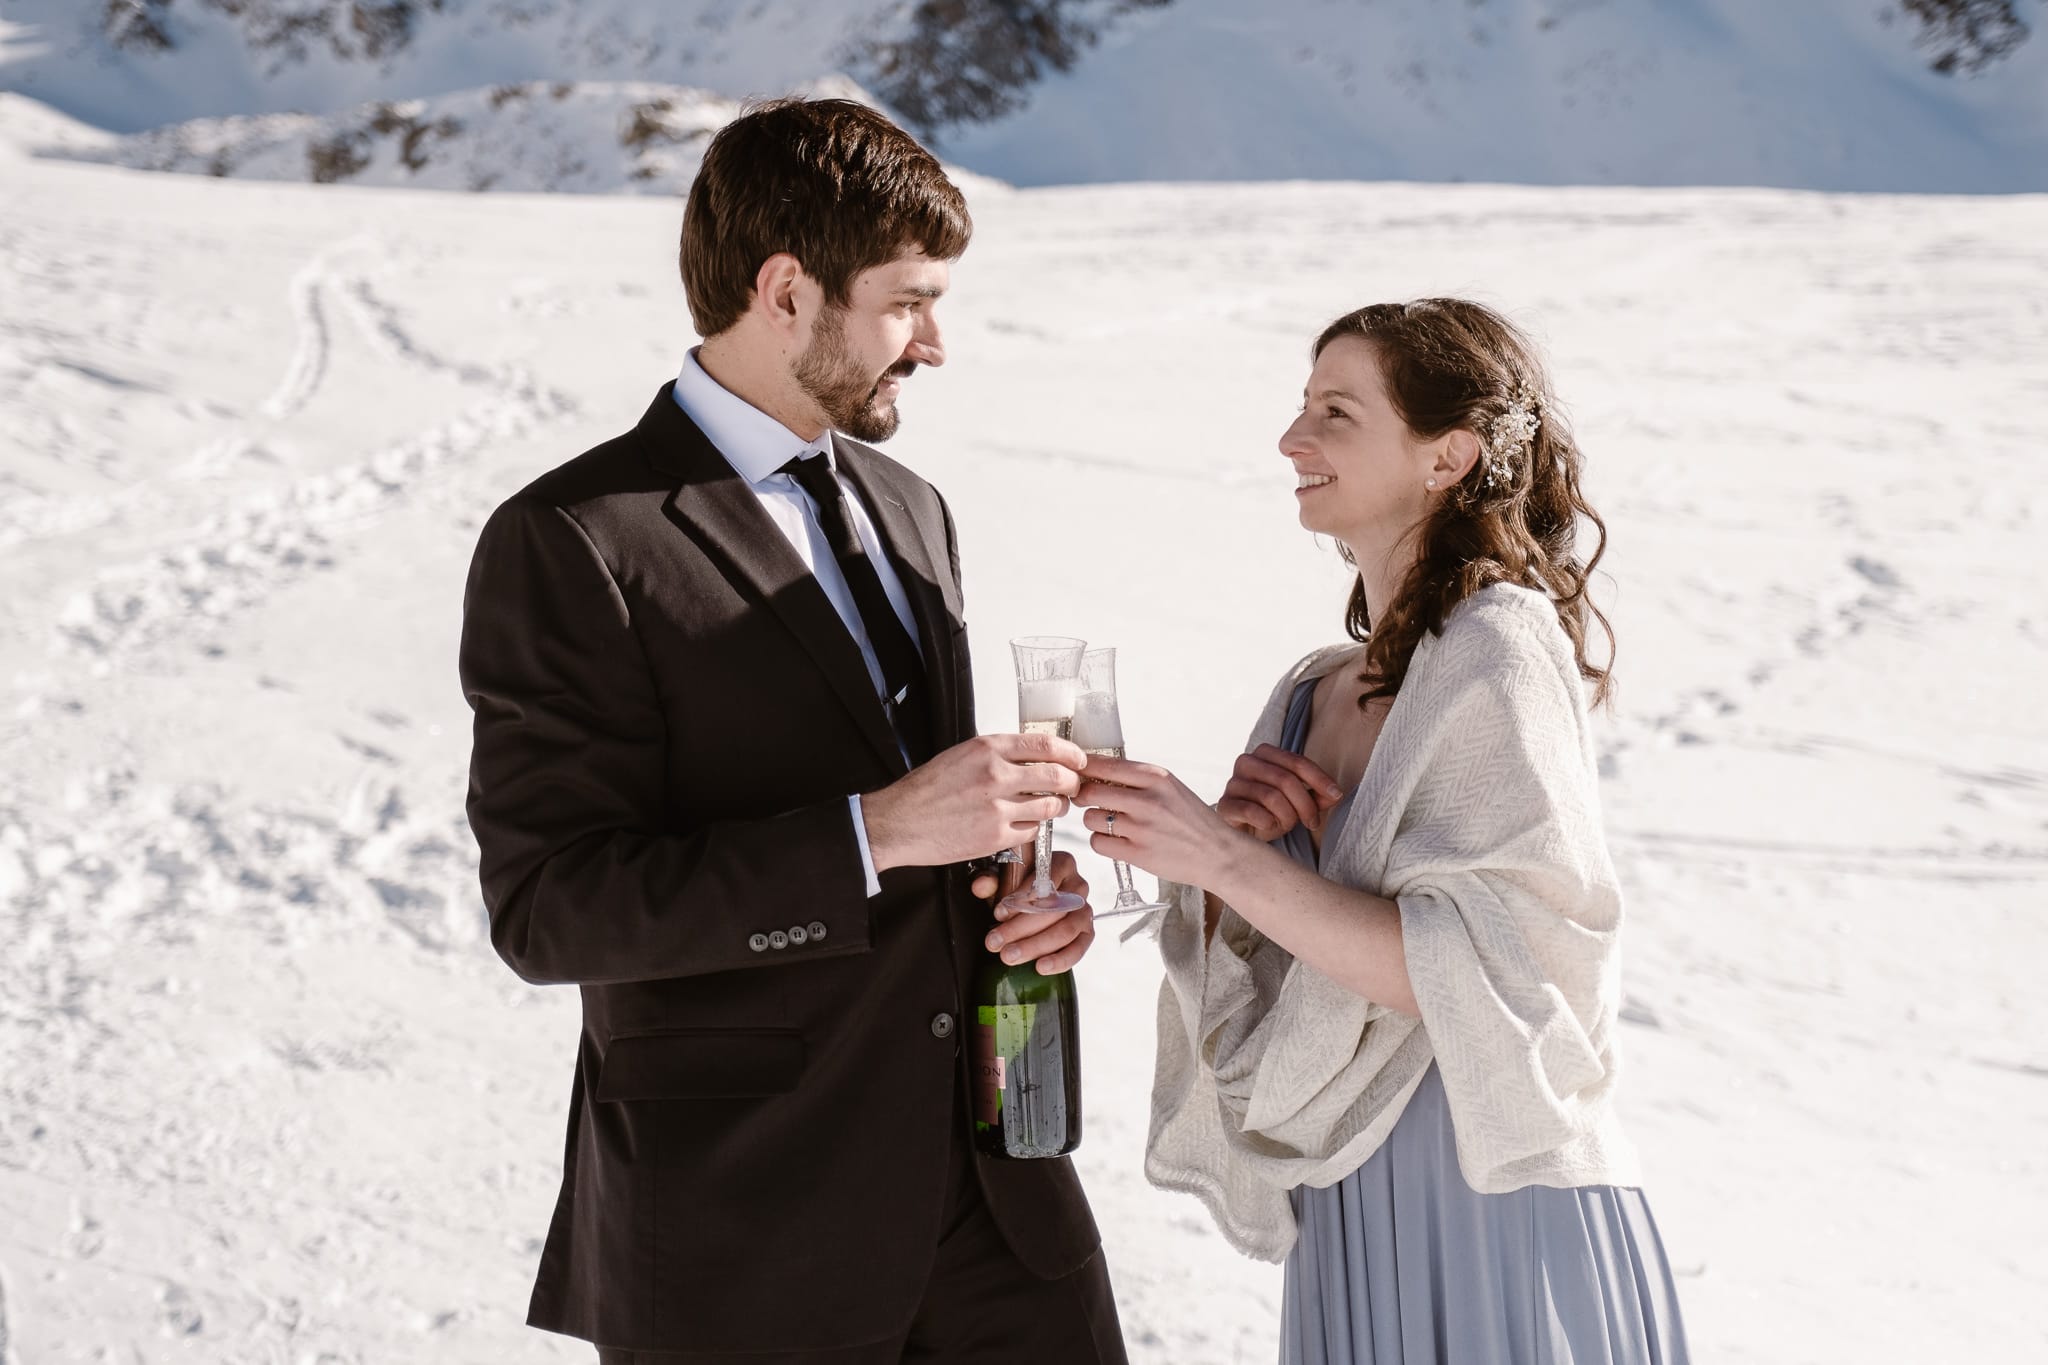 Bride and groom popping champagne bottle, winter mountain elopement, Colorado ski wedding, backcountry skiing elopement